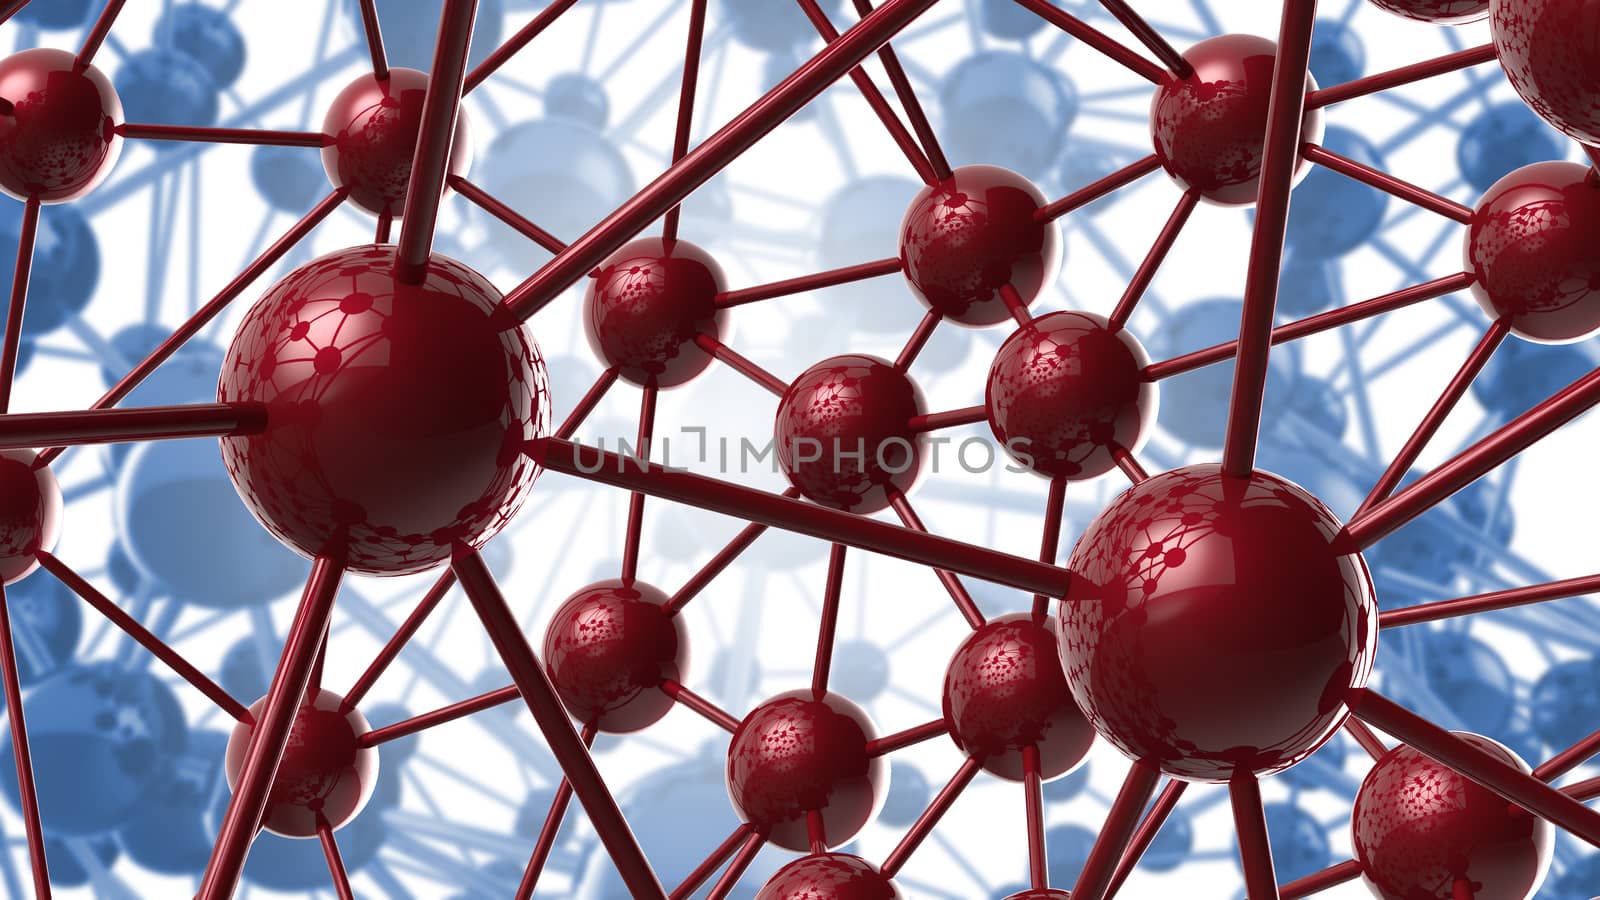 blue and red Molecular geometric chaos abstract structure. Science technology network connection hi-tech background 3d rendering illustration.